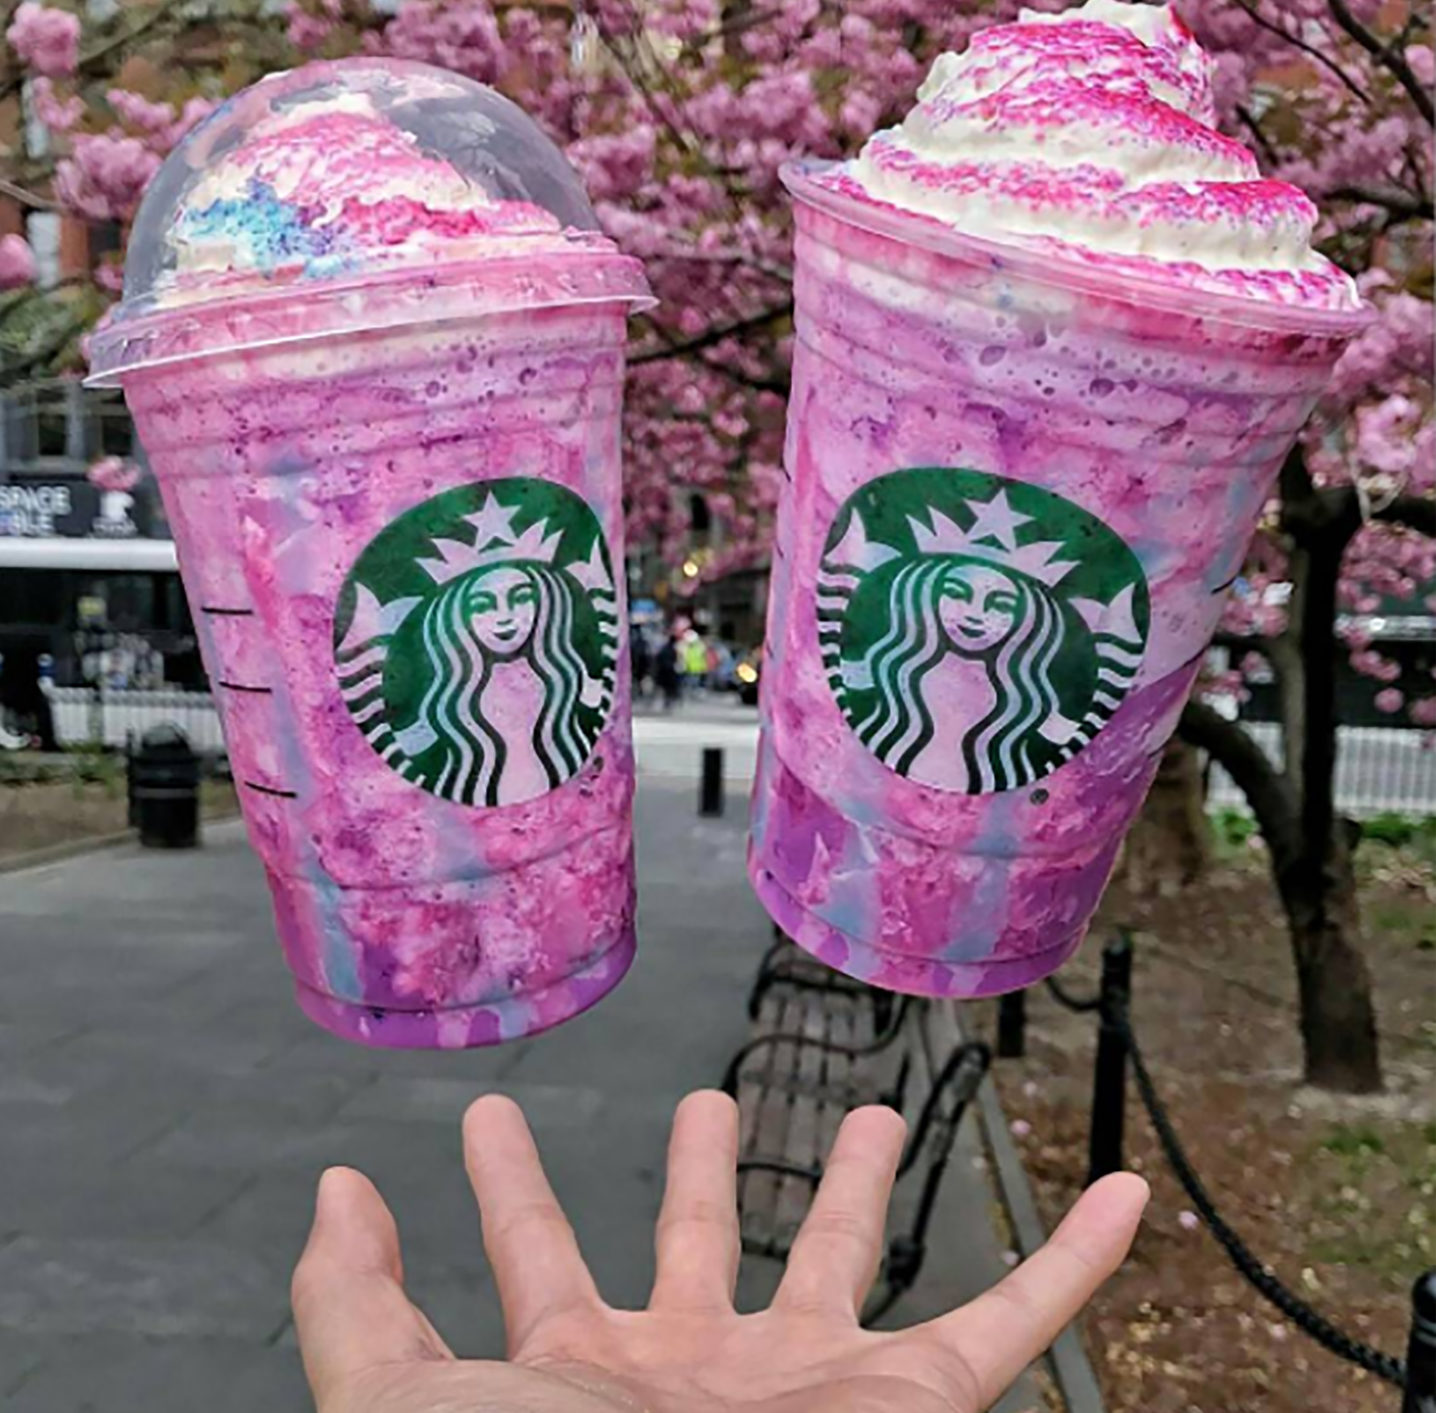 Floating Unicorn Frappuccinos from Starbucks